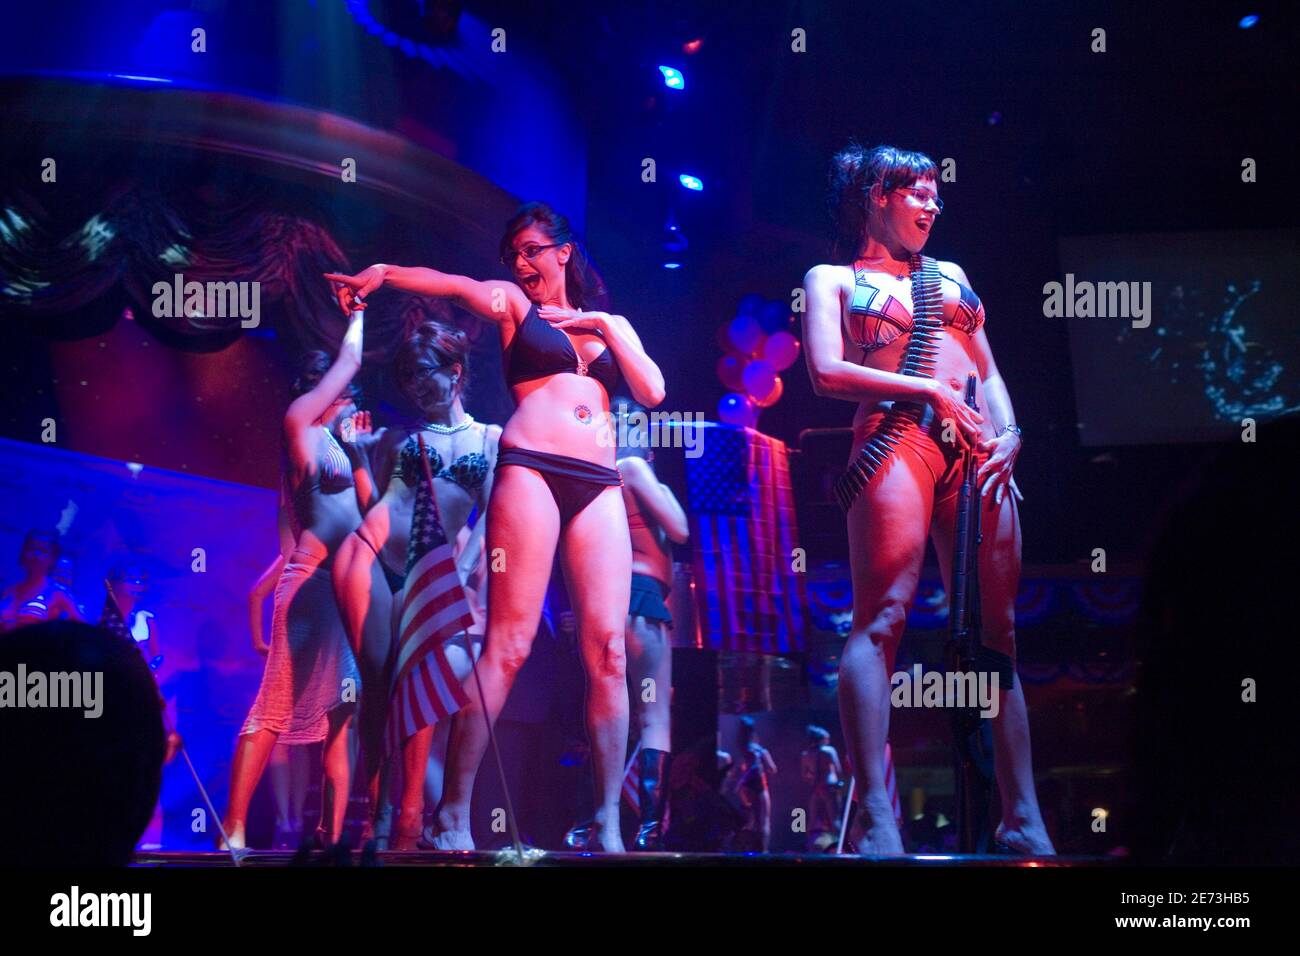 Strippers stage images